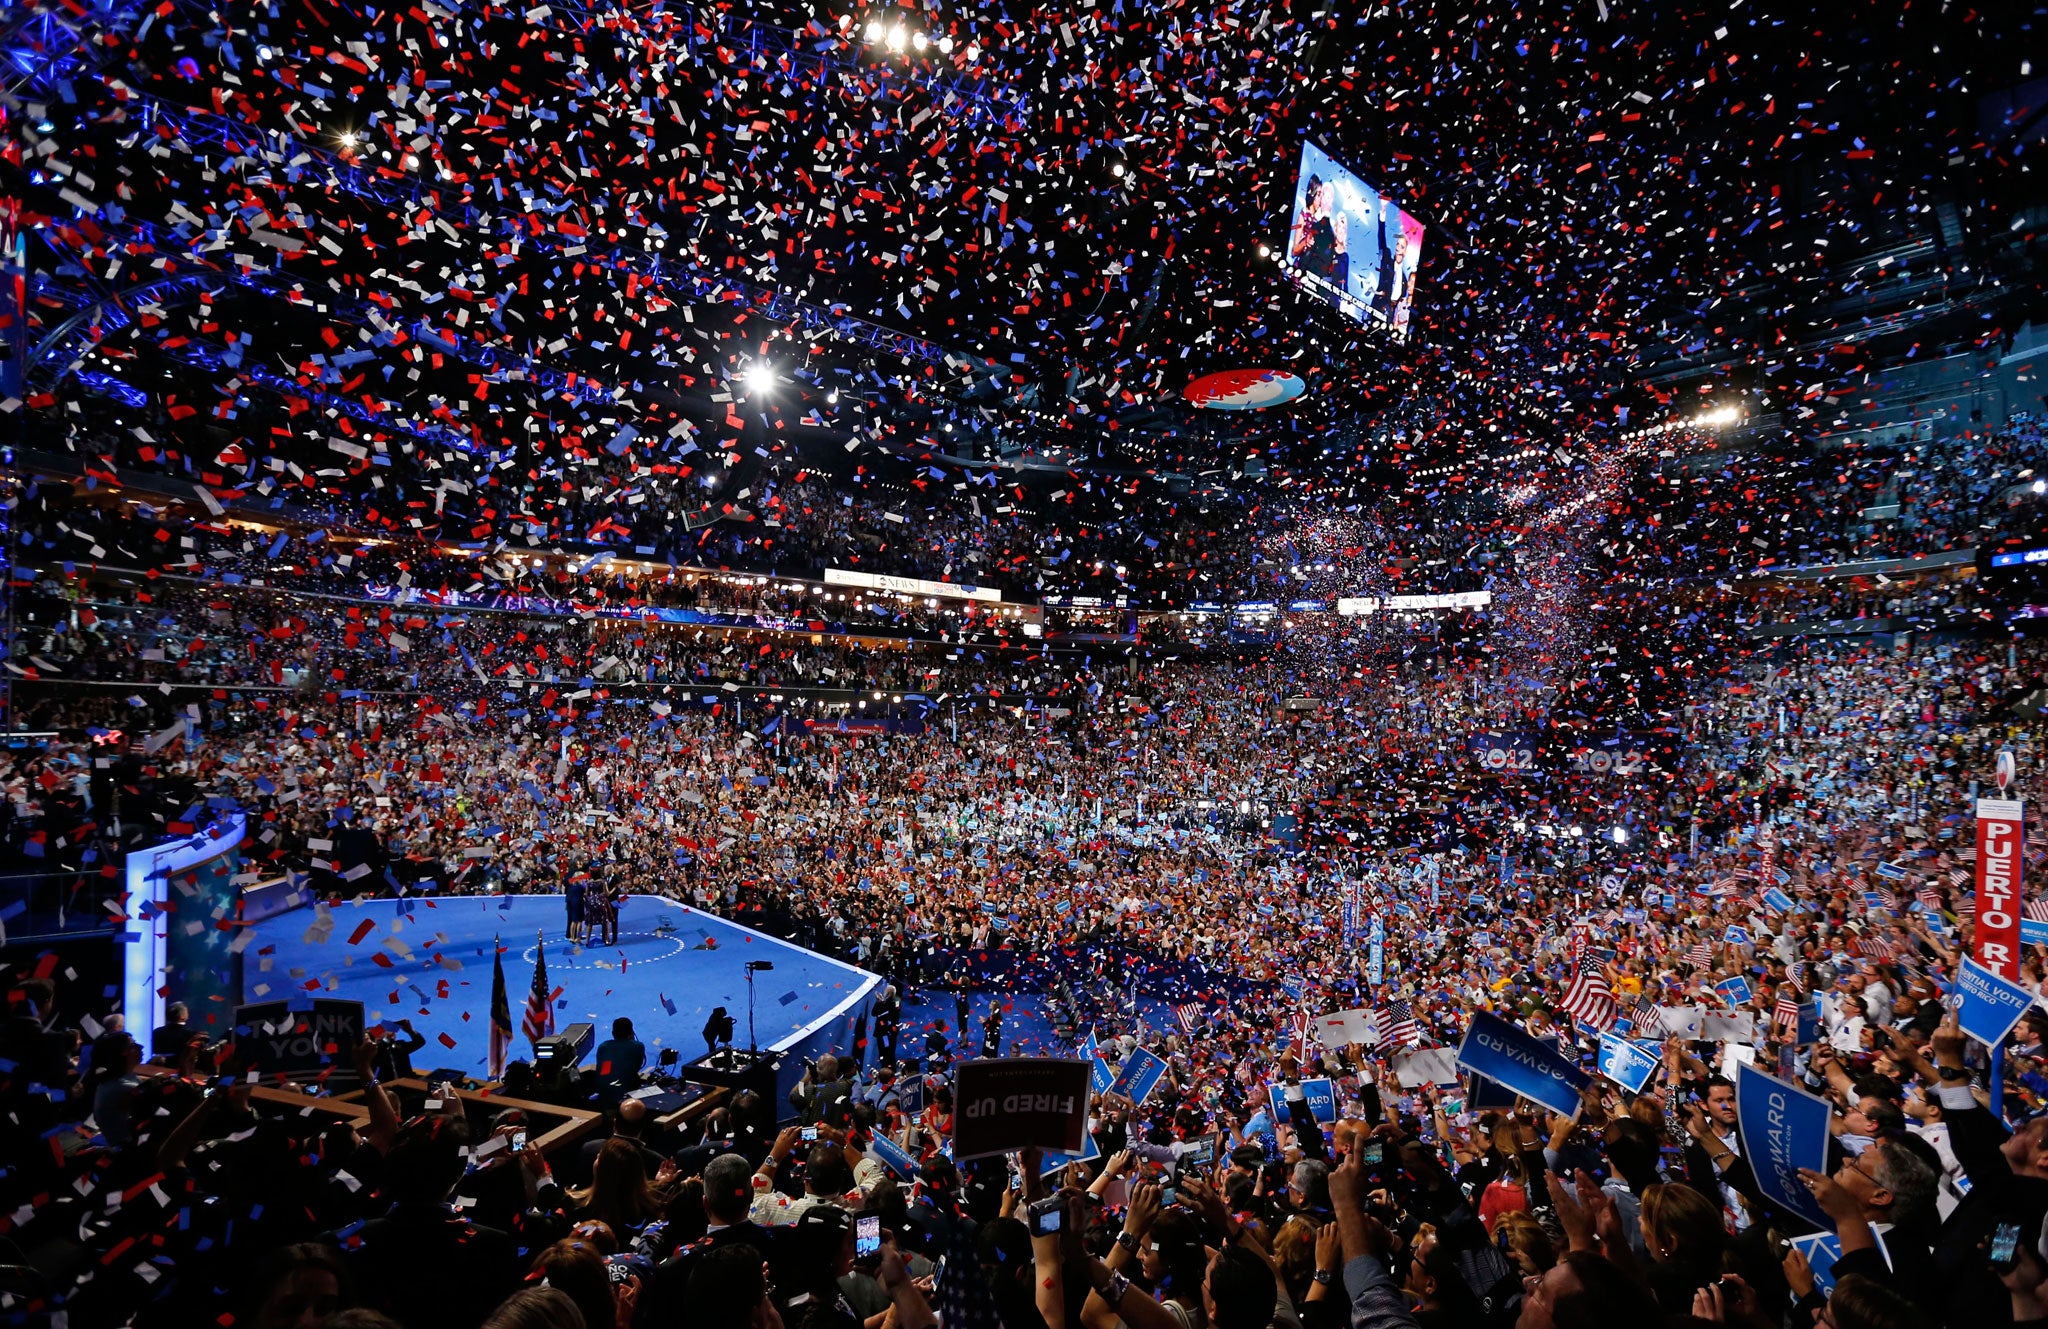 Barack Obama and Joe Biden and their families at the conclusion of the Democratic National Convention